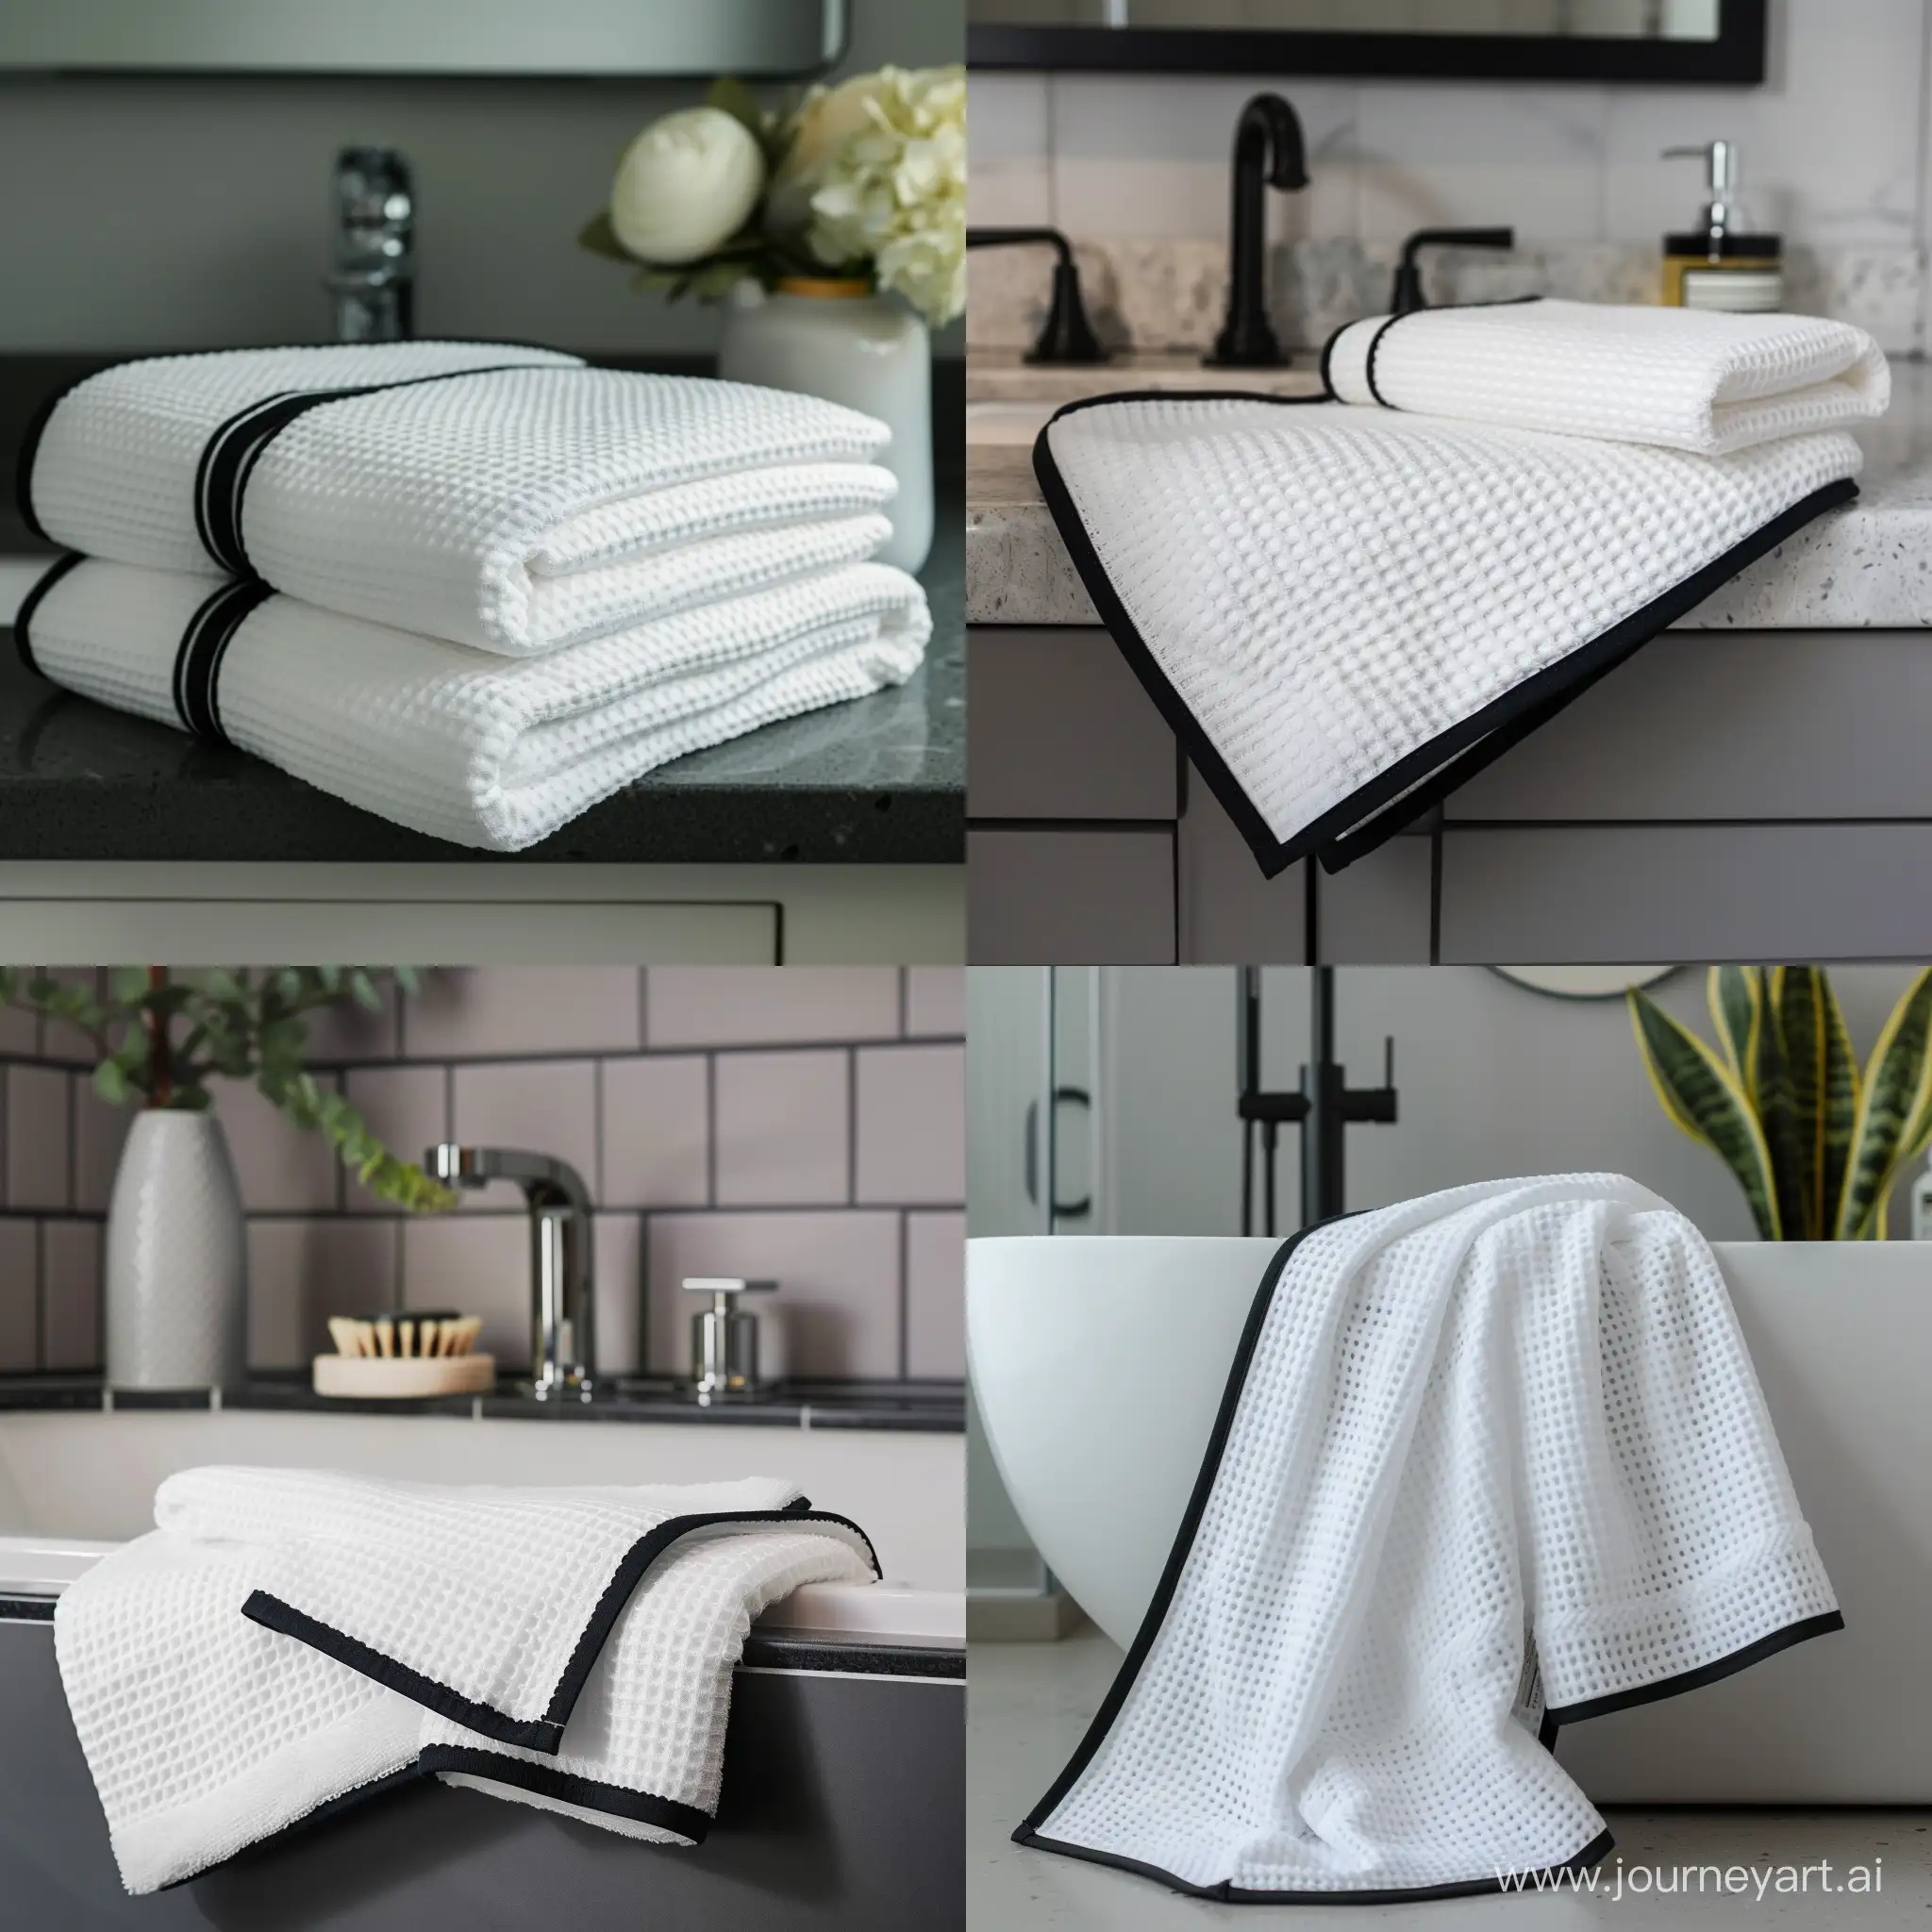 Monochrome-Contrast-White-Waffle-Towel-with-Black-Trim-in-a-Gray-Bathroom